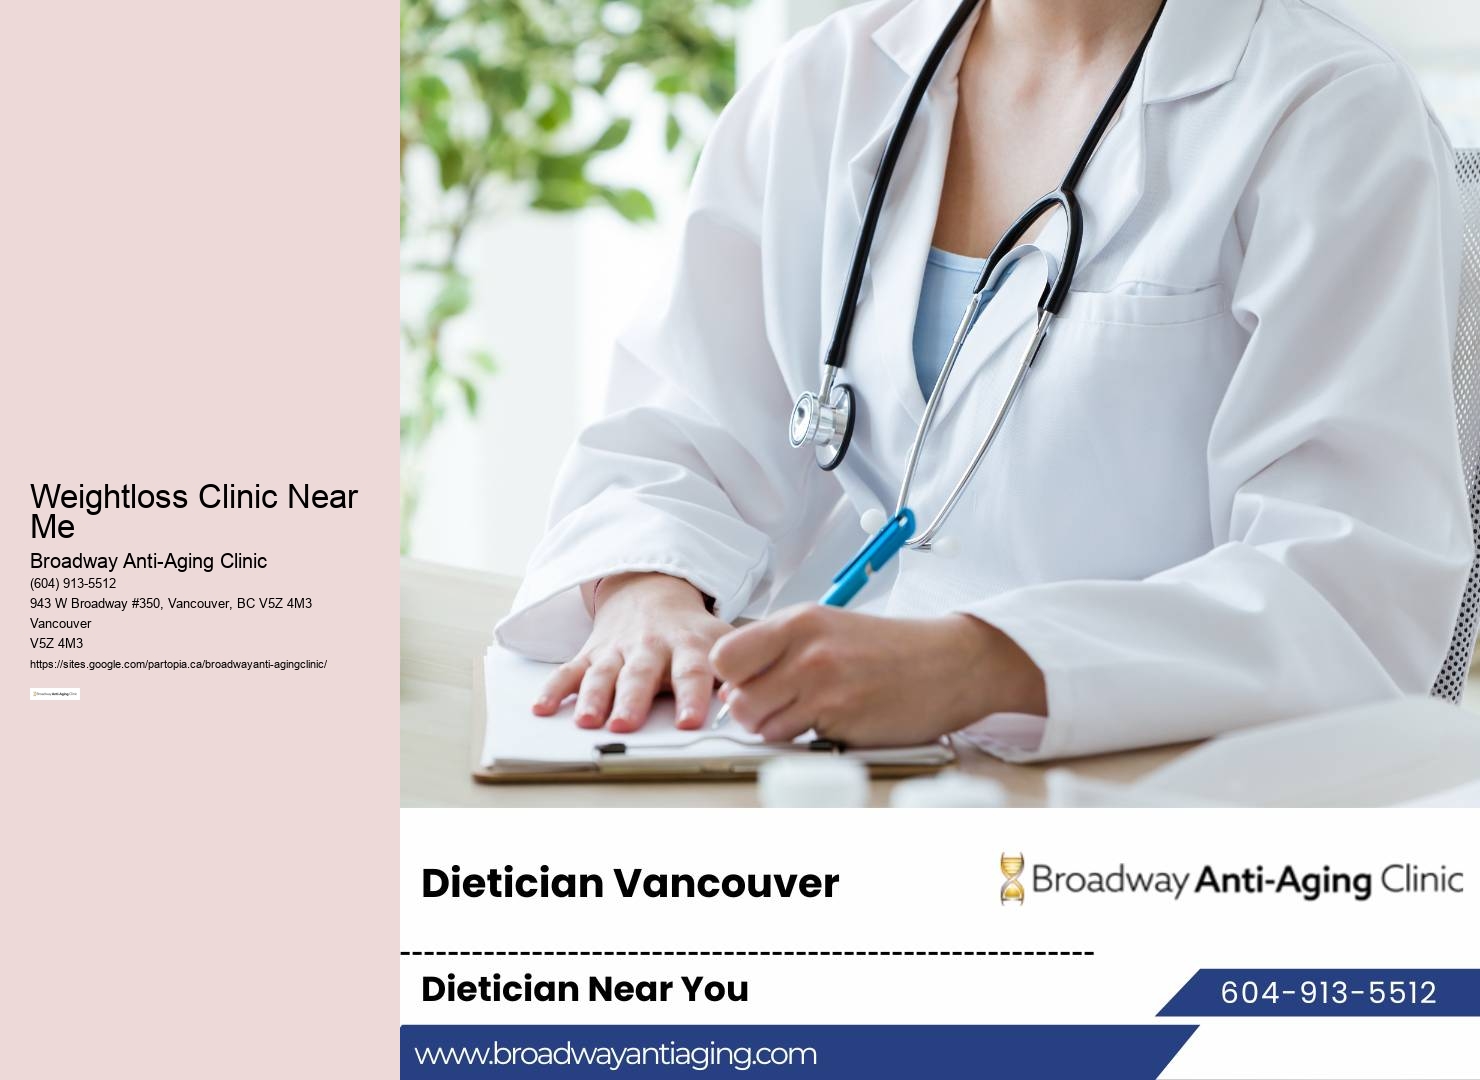 Revolution medical clinic Vancouver reviews